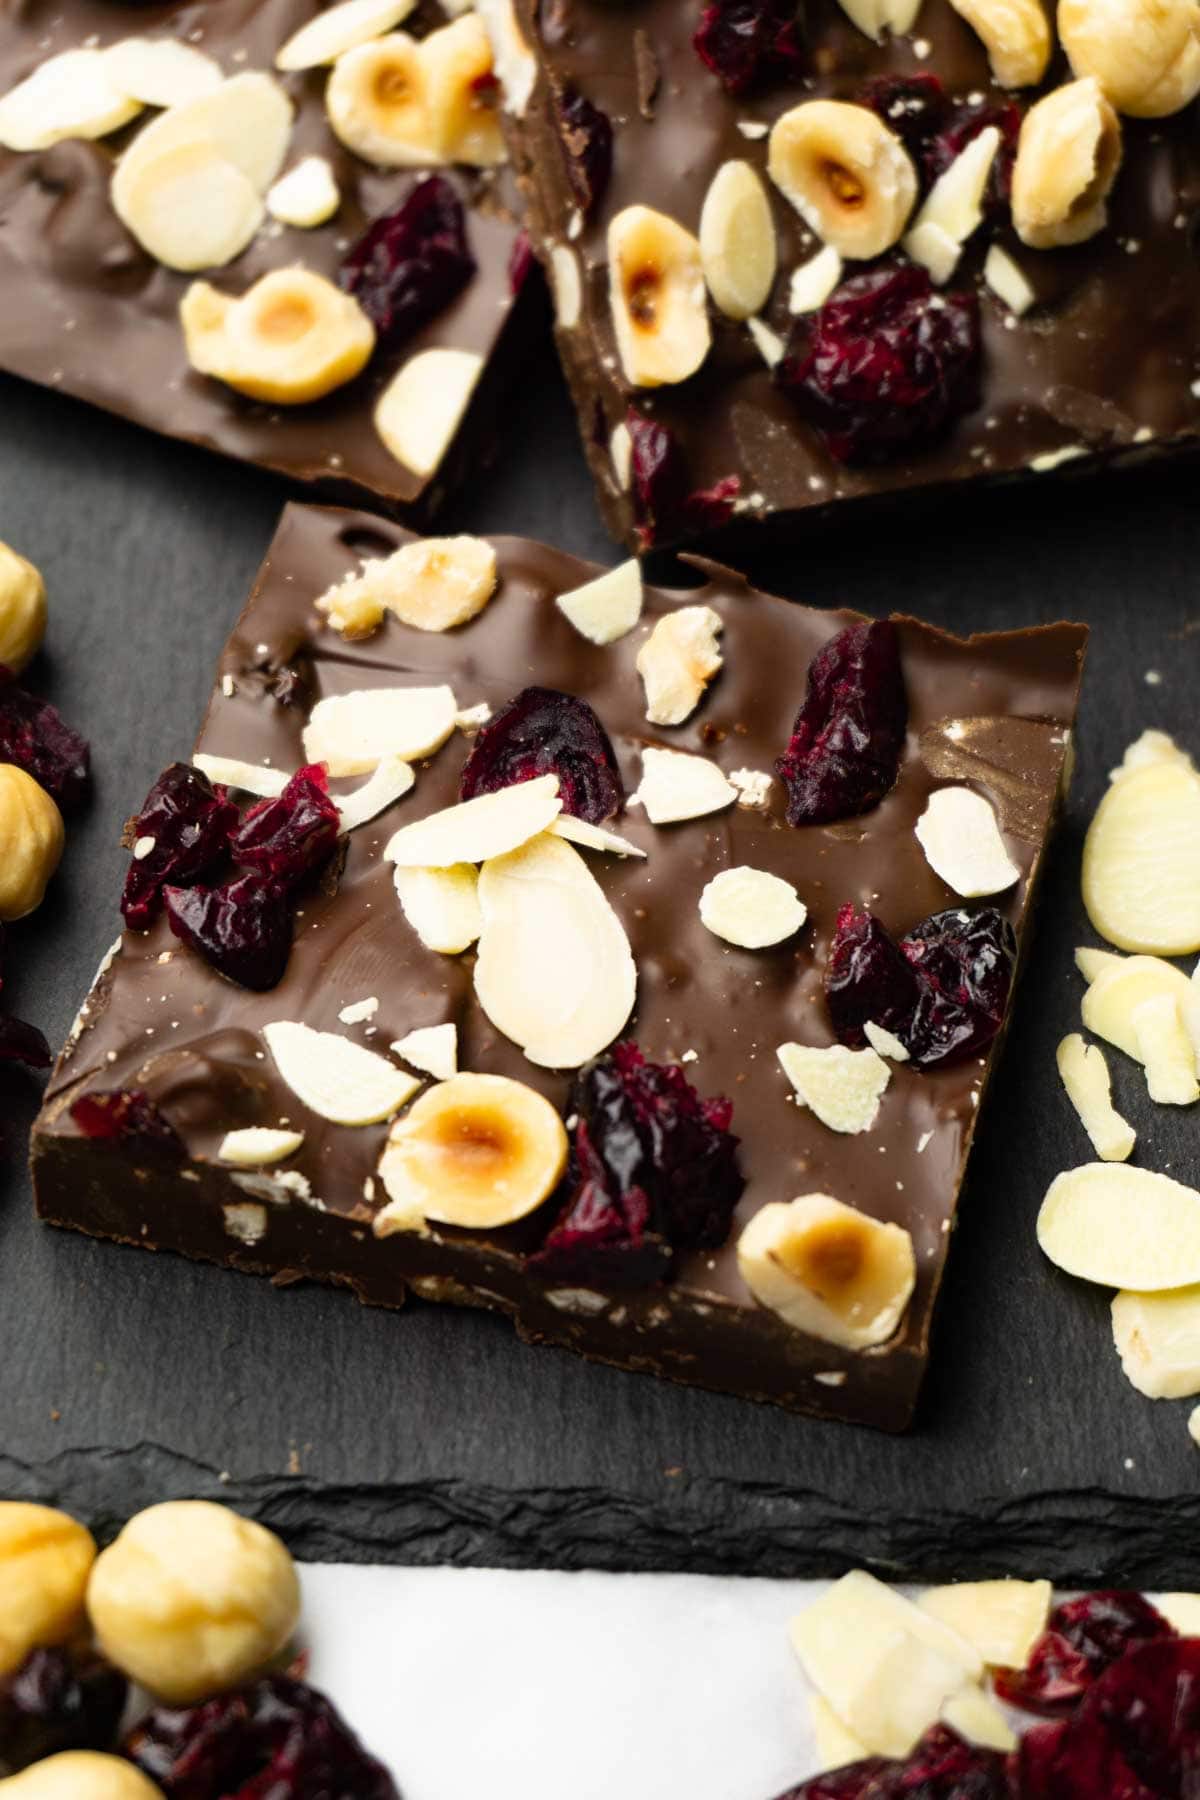 Pieces of dark chocolate bark with dried cranberries and roasted hazelnuts served on a dark serving stone board.